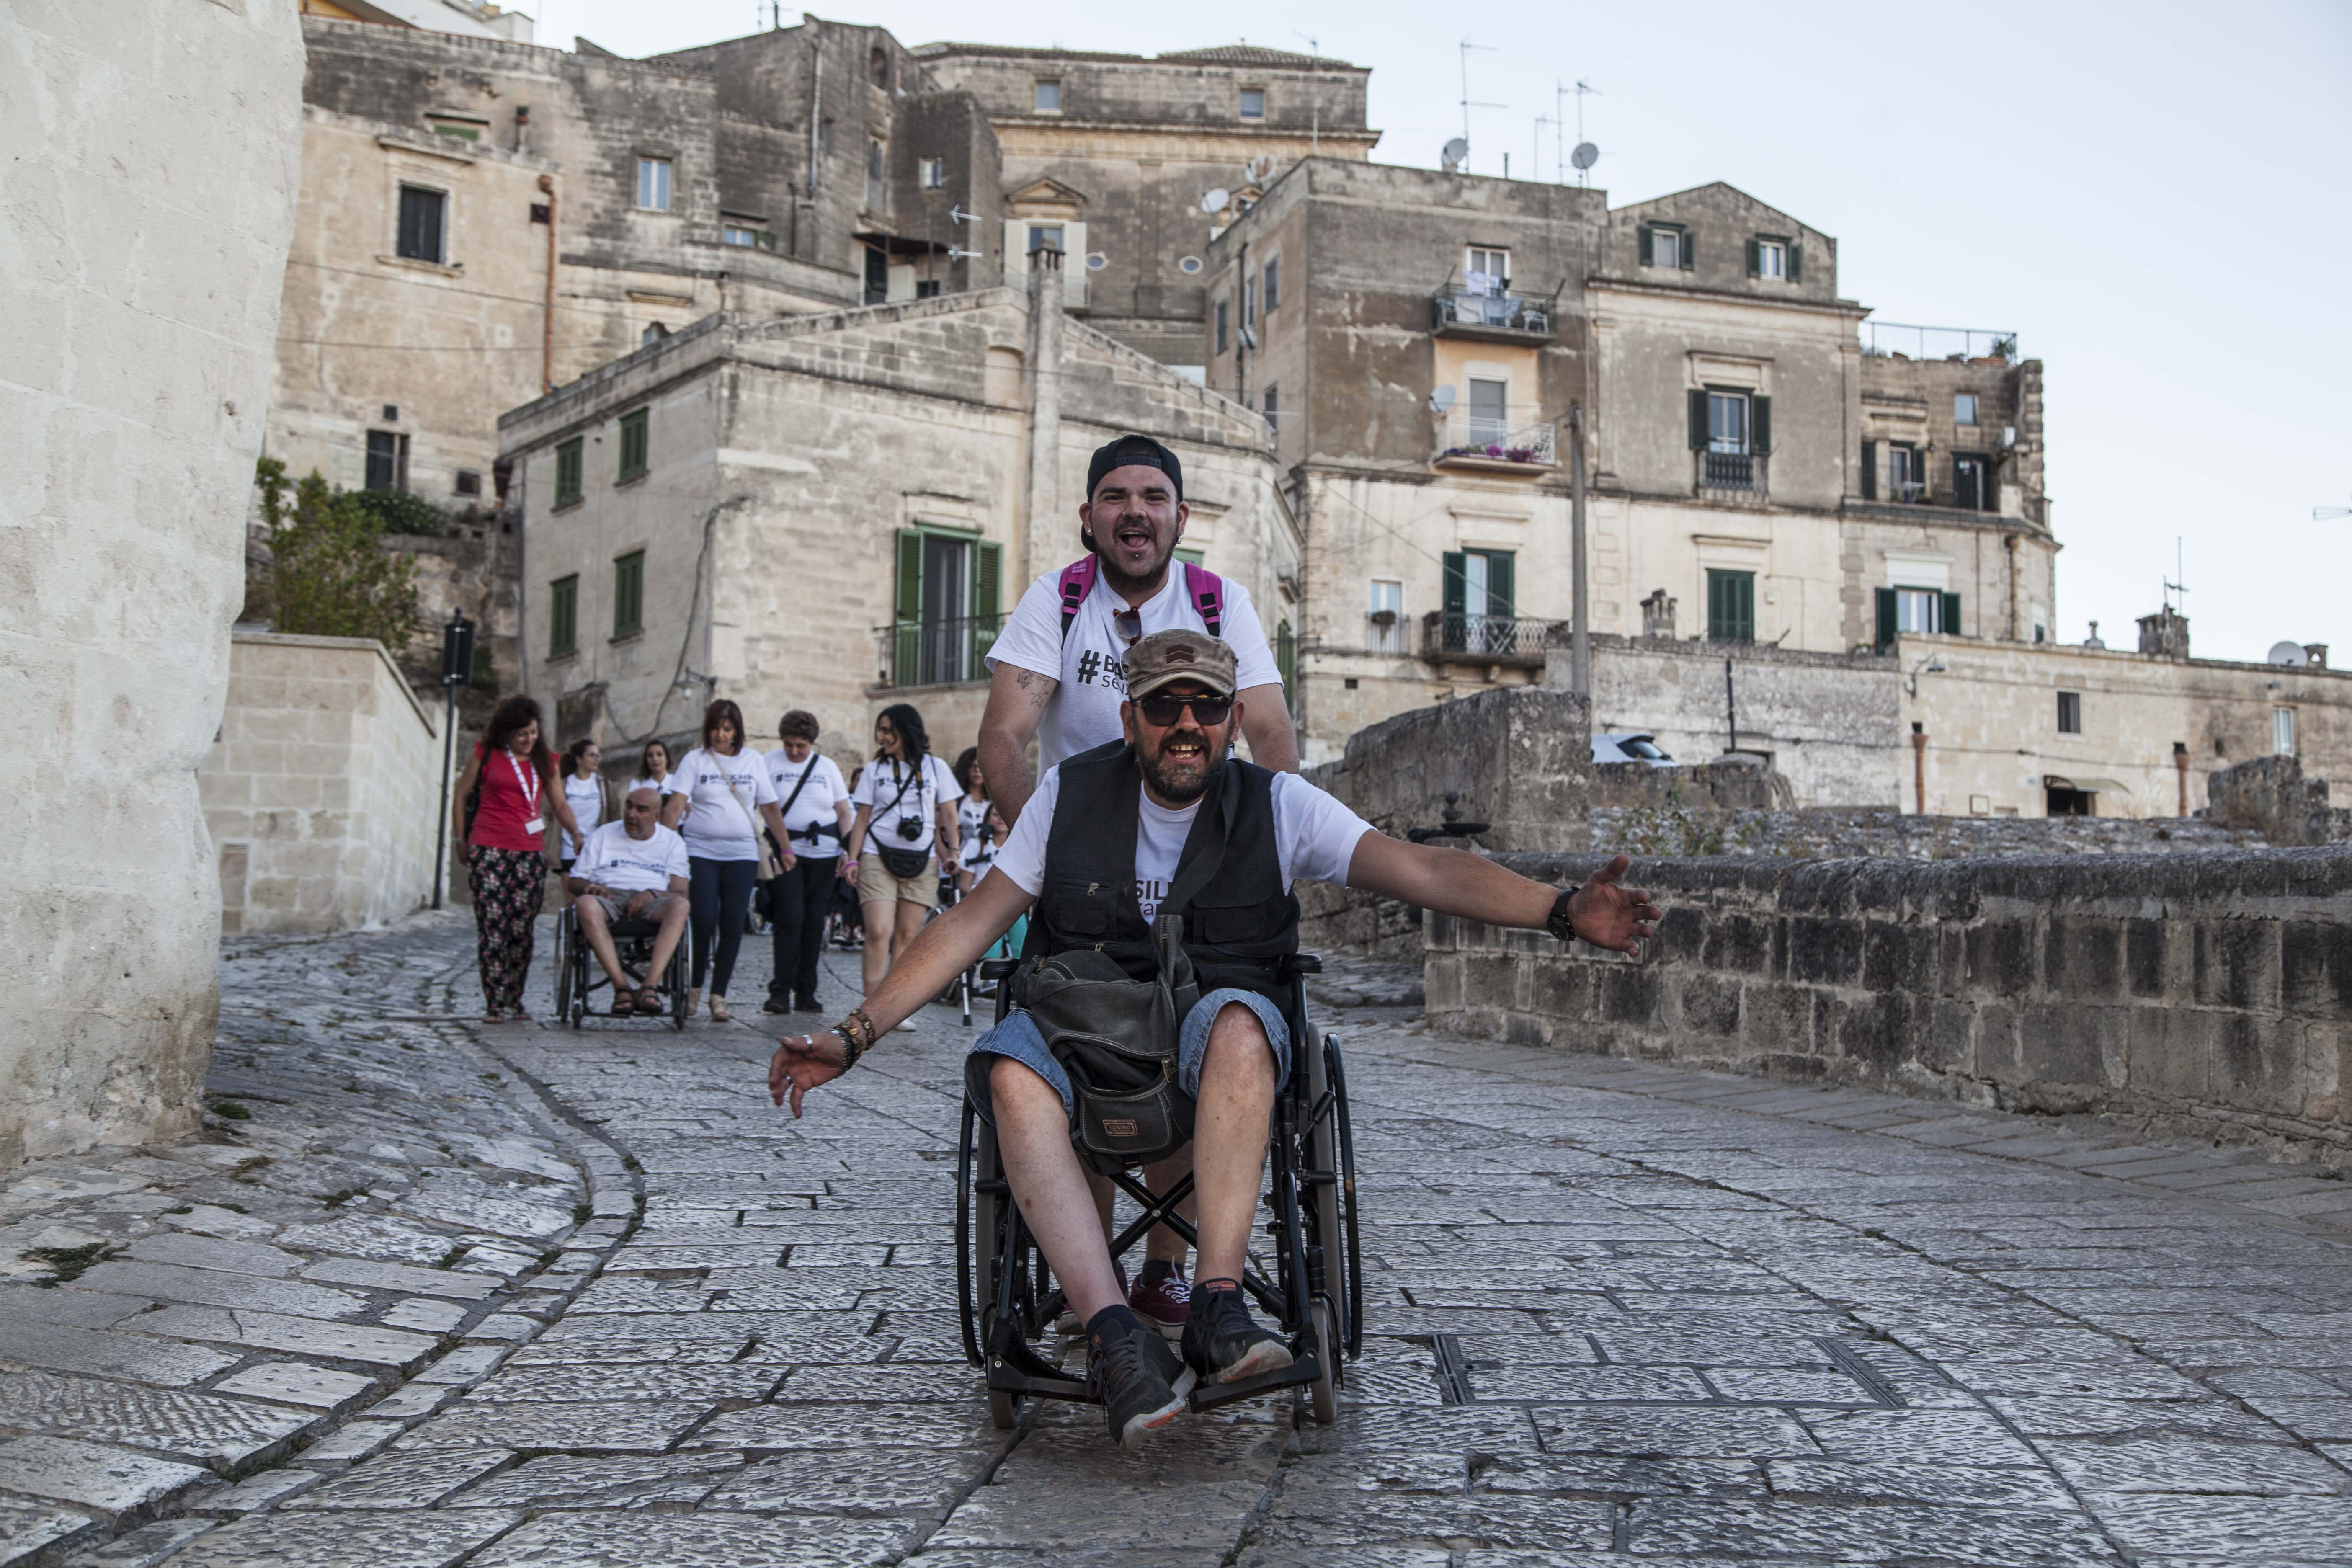 Person with mobility impariments enjoying his holiday in Matera, Italy